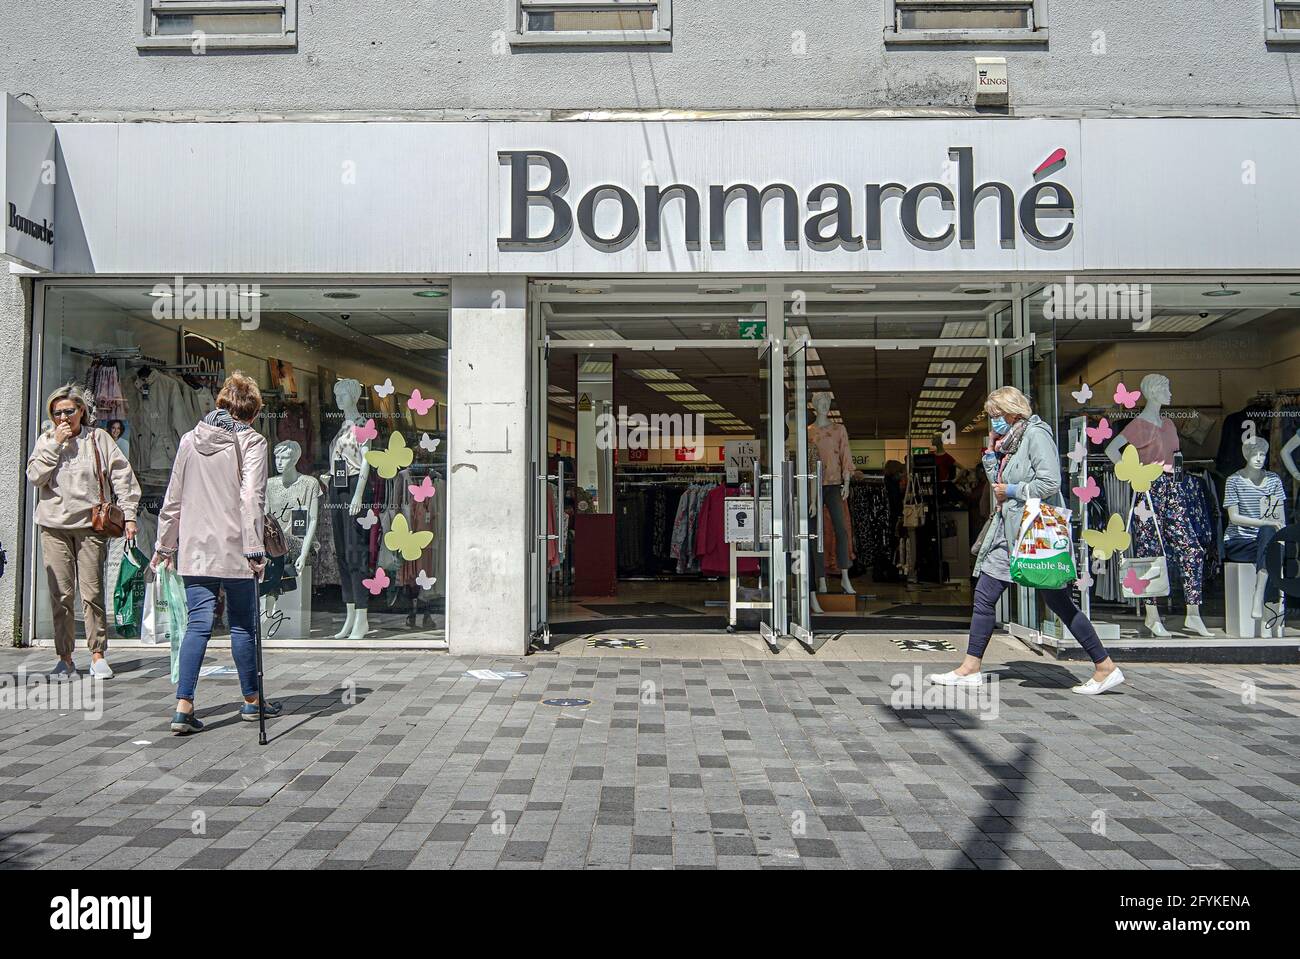 Shoppers pass by Bonmarche Clothes Store on Bow St Stock Photo - Alamy